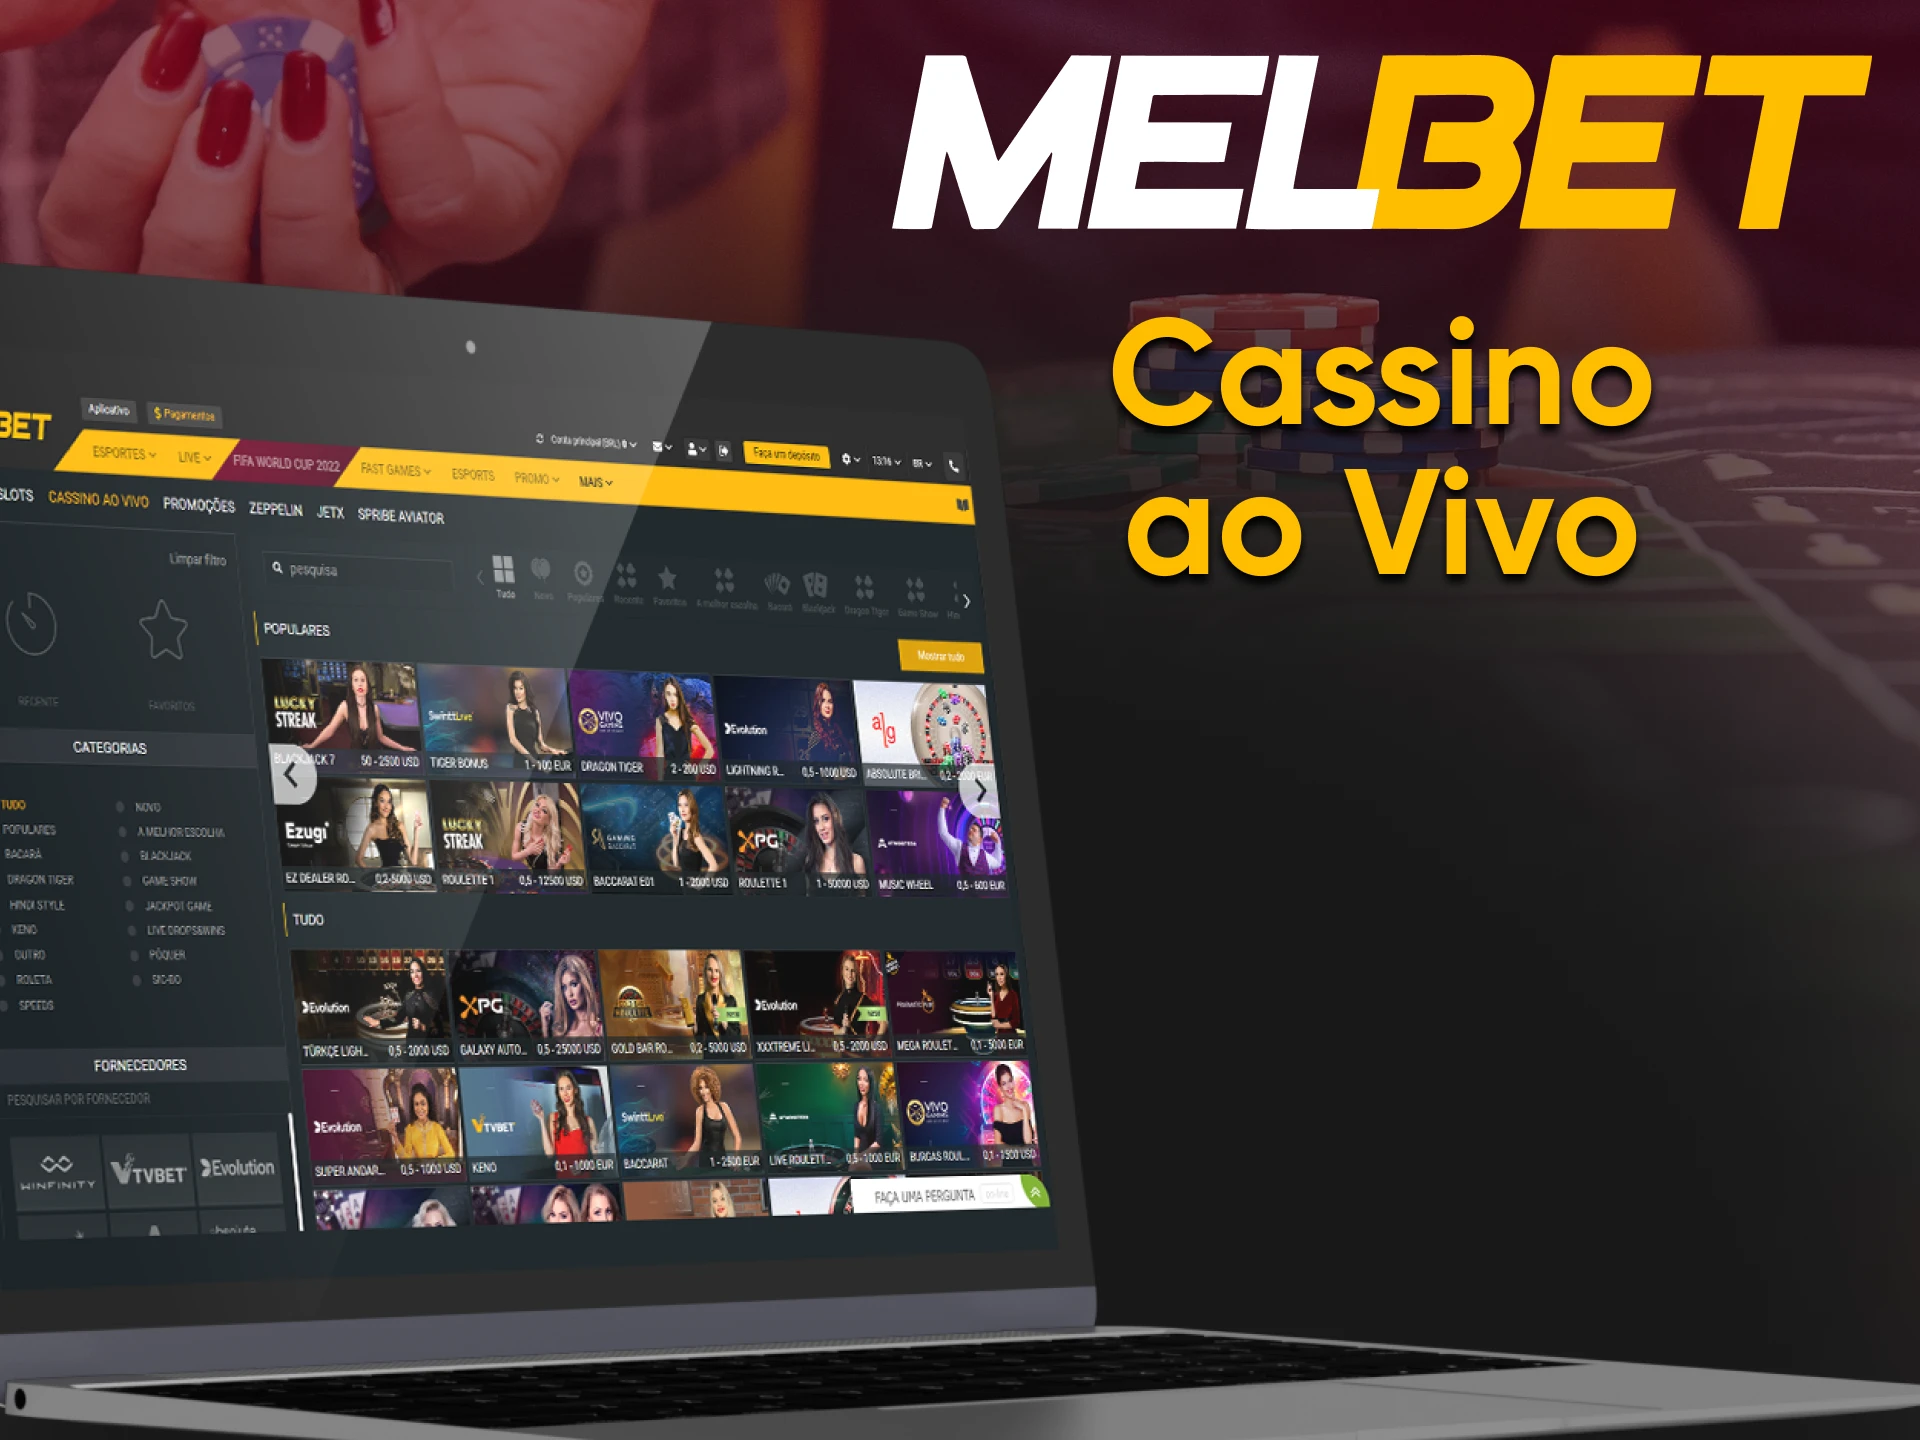 The Melbet website has a section for fans of more real casino games.